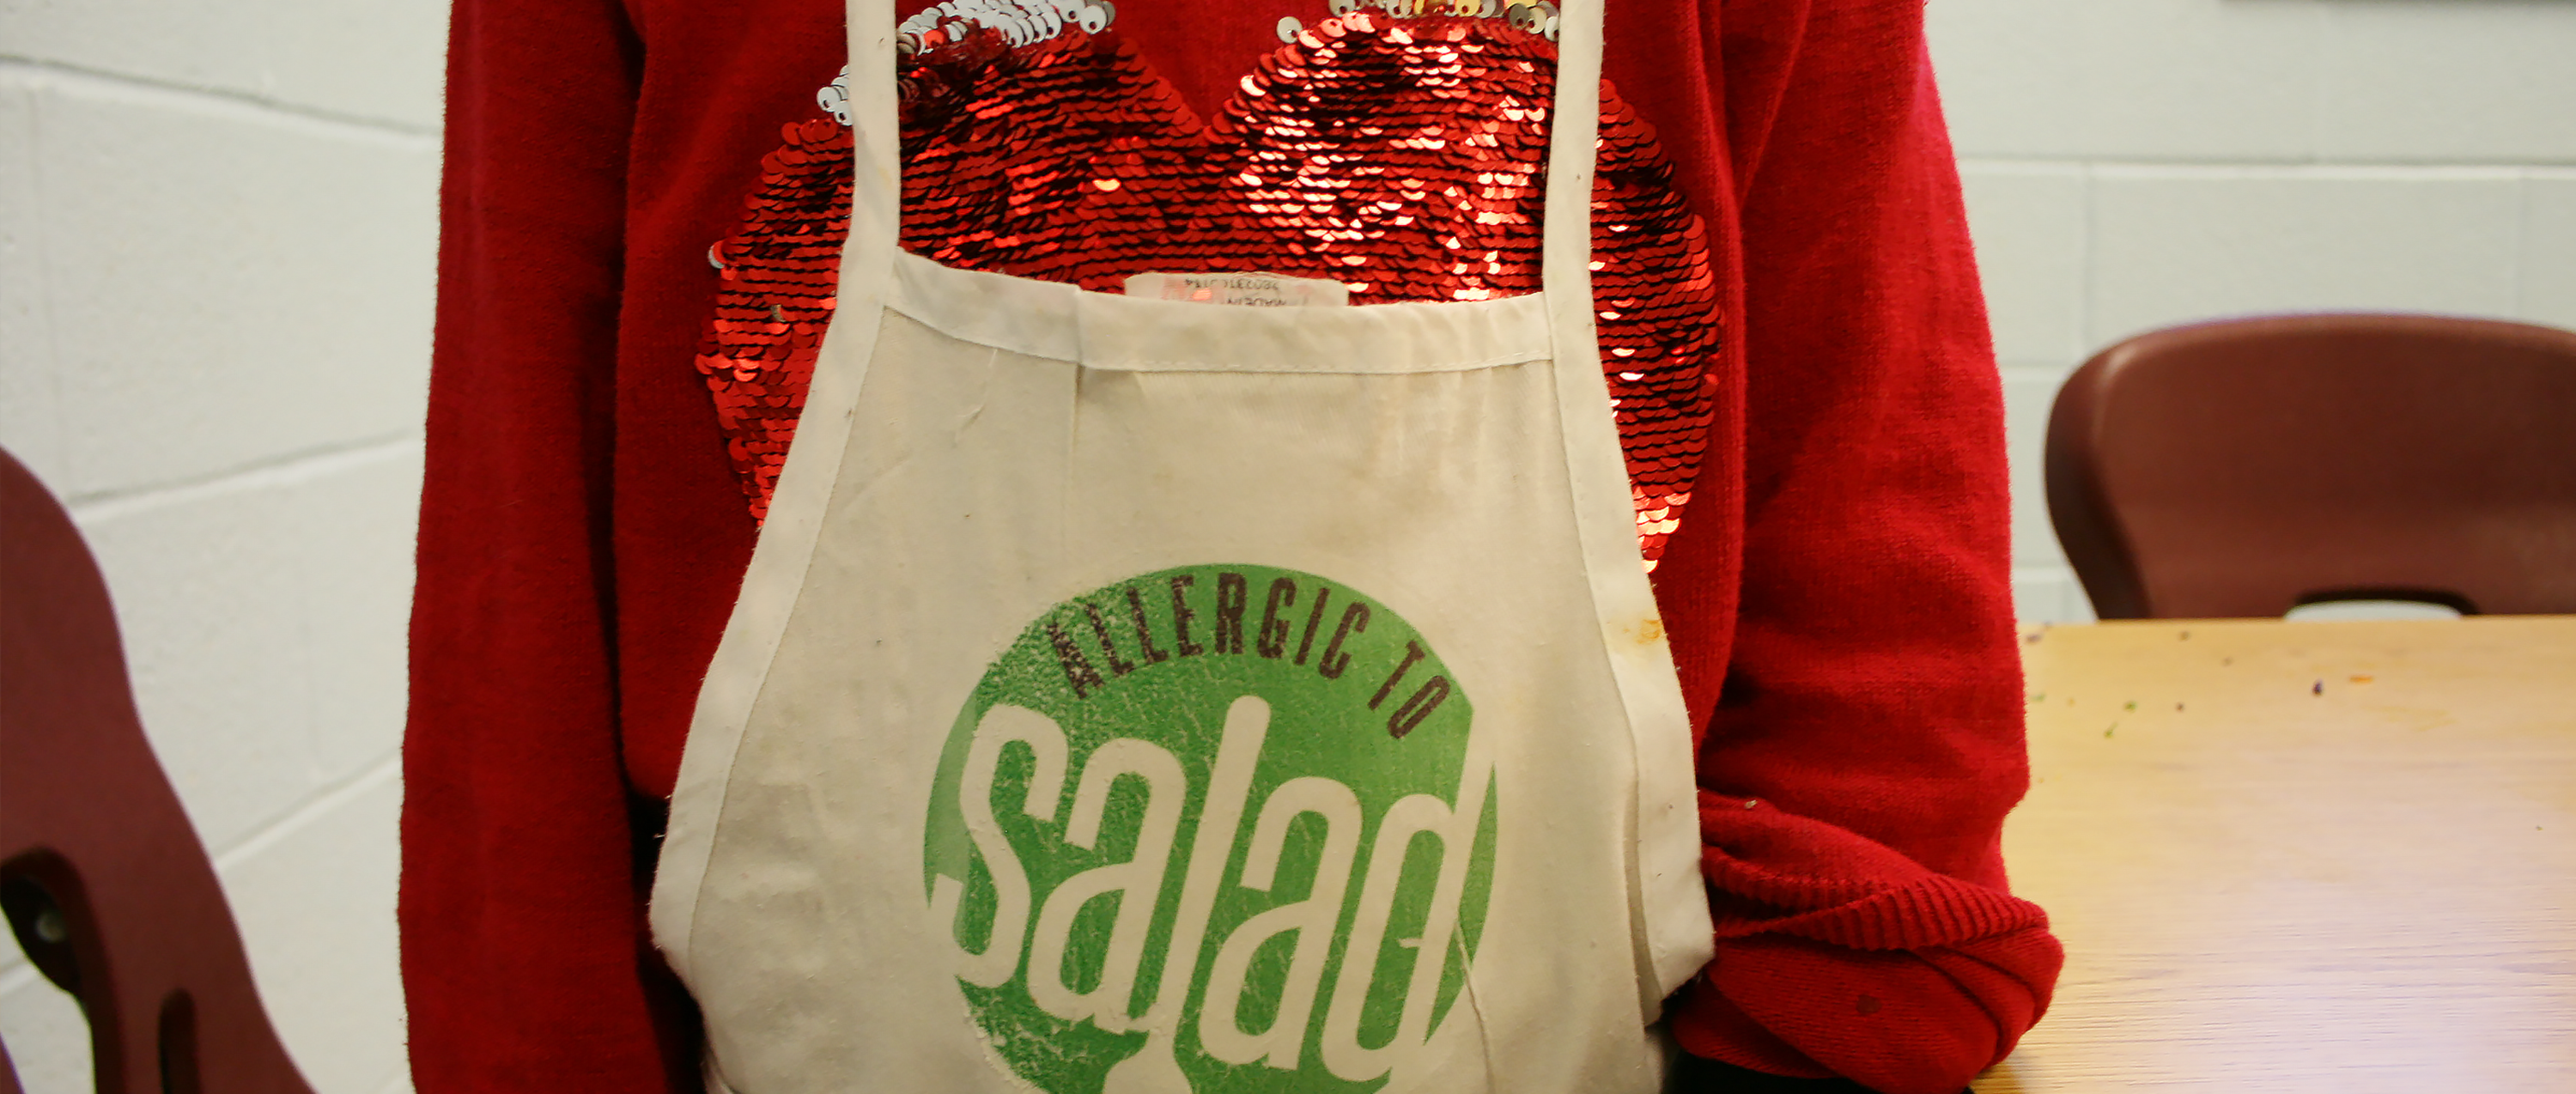 Allergic to Salad continues restaurant partnerships for community classes and partners with after school programs across the city